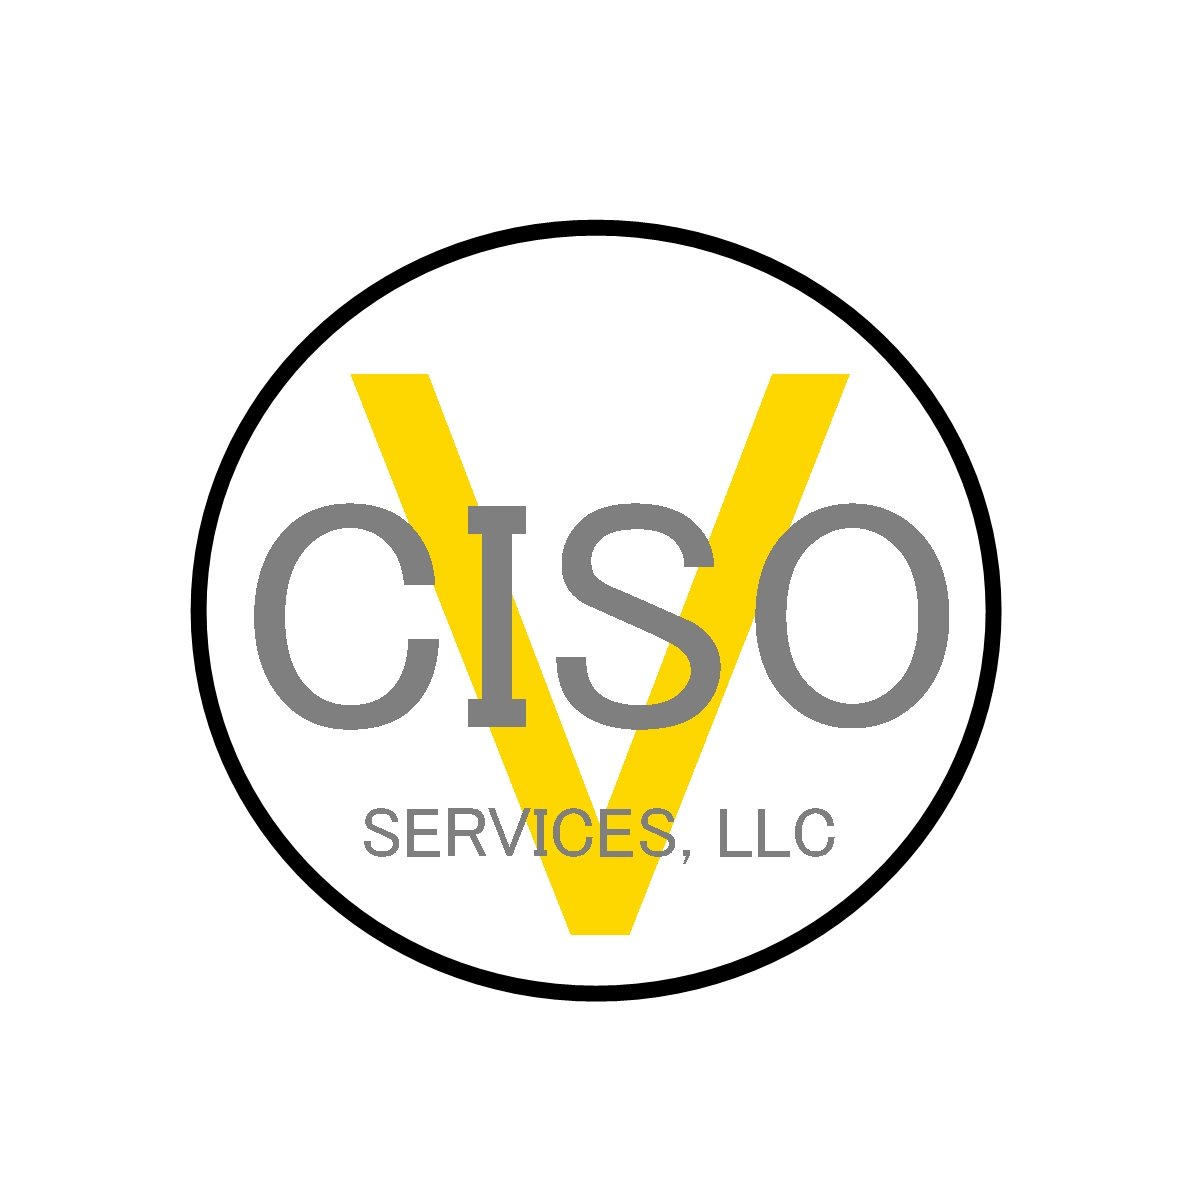 Virtual CISO - Not all businesses can afford a full-time Chief Information Security Officer. Our virtual CISO services can help. #vciso #VirtualCISO #infosec